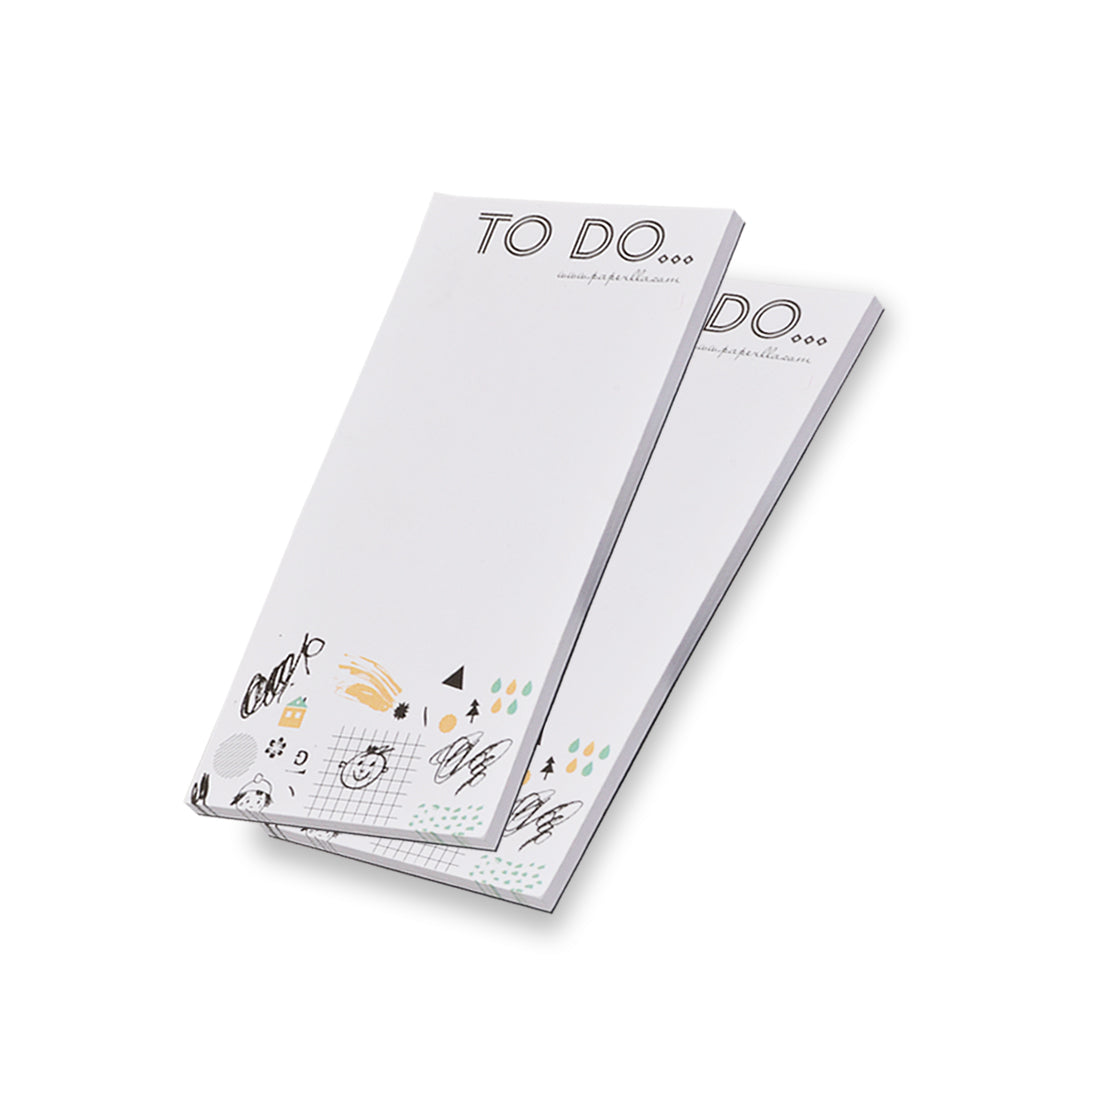 To Do List Notepad - Daily Planner Note Pad Undated Productivity Organizer Set of 4